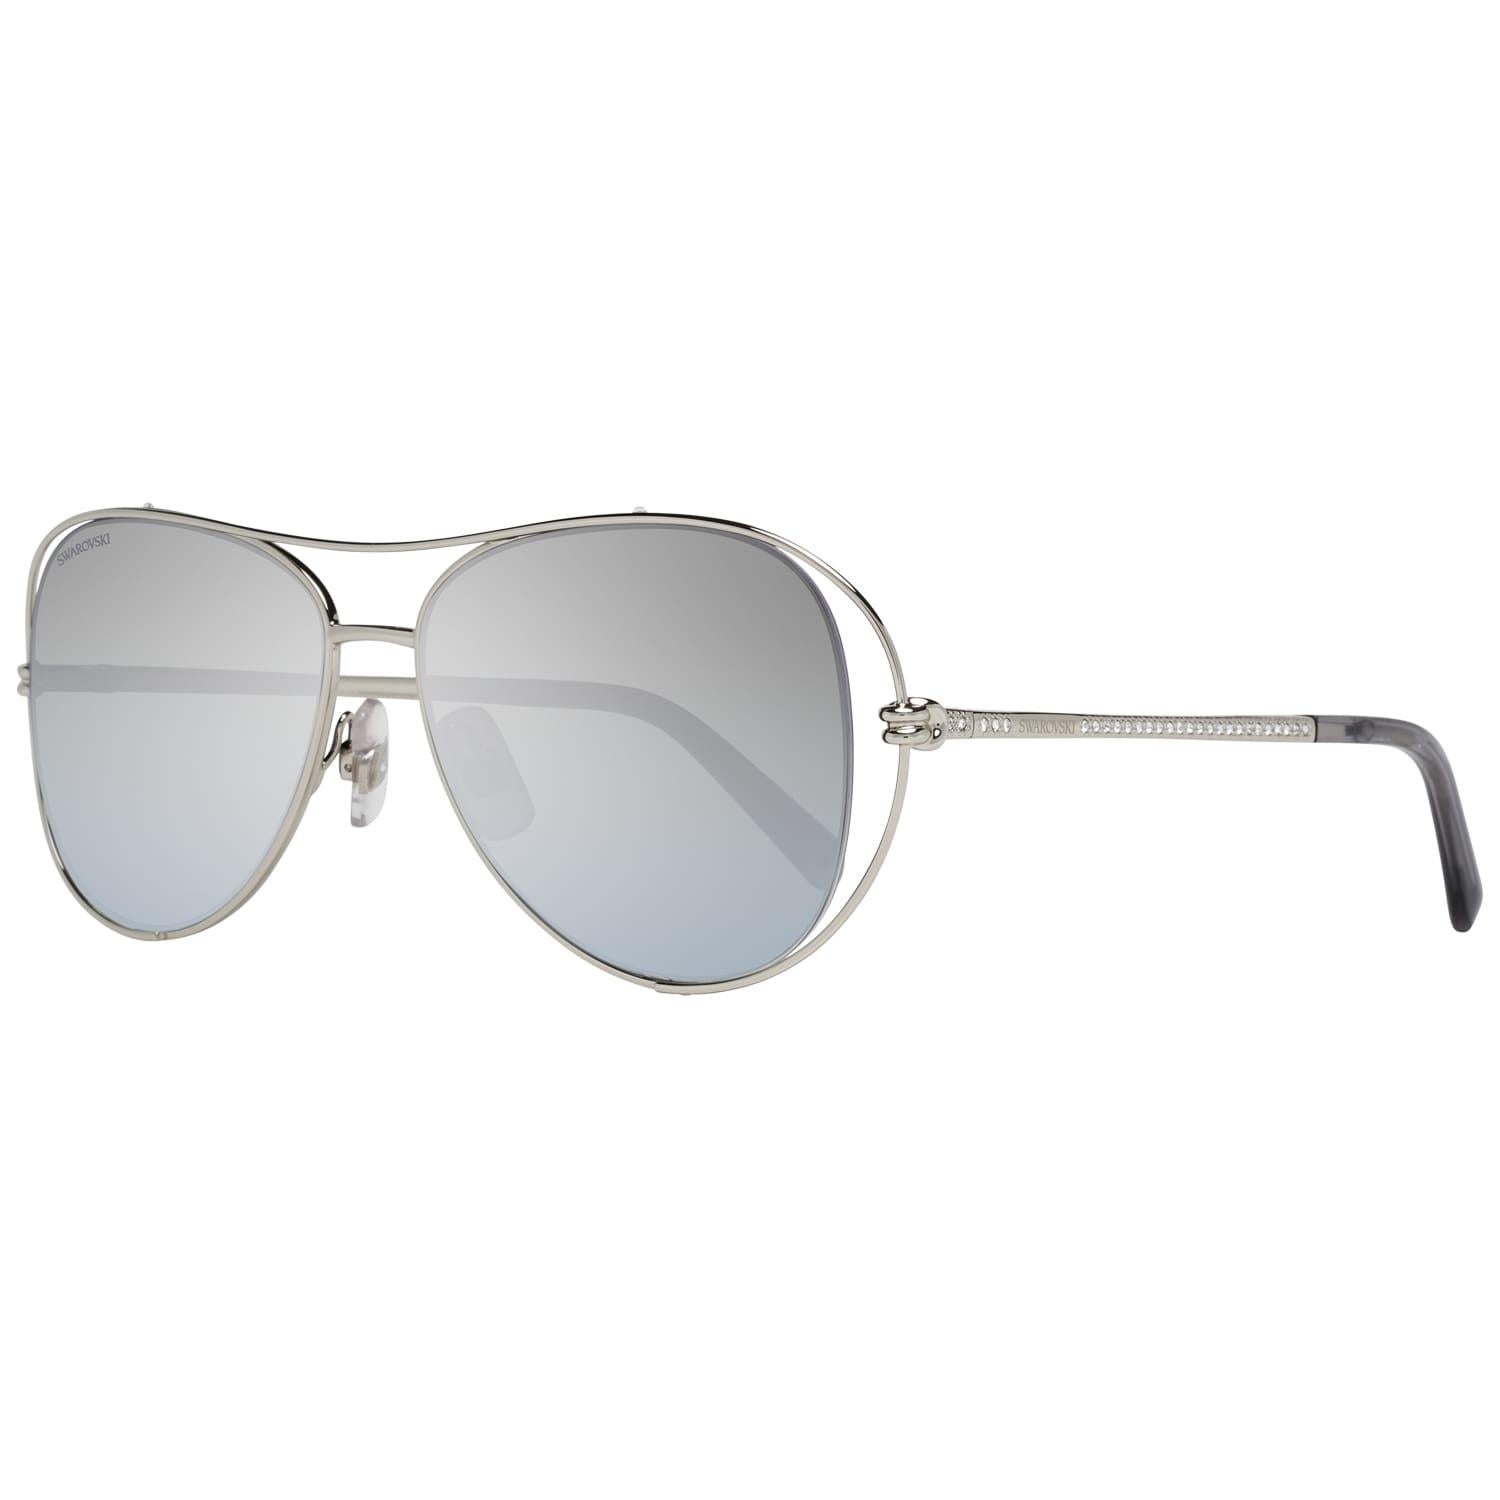 DetailsMATERIAL: MetalCOLOR: SilverMODEL: SK0231 5516CGENDER: WomenCOUNTRY OF MANUFACTURE: ChinaTYPE: SunglassesORIGINAL CASE?: YesSTYLE: AviatorOCCASION: CasualFEATURES: LightweightLENS COLOR: GreyLENS TECHNOLOGY: GradientYEAR MANUFACTURED: